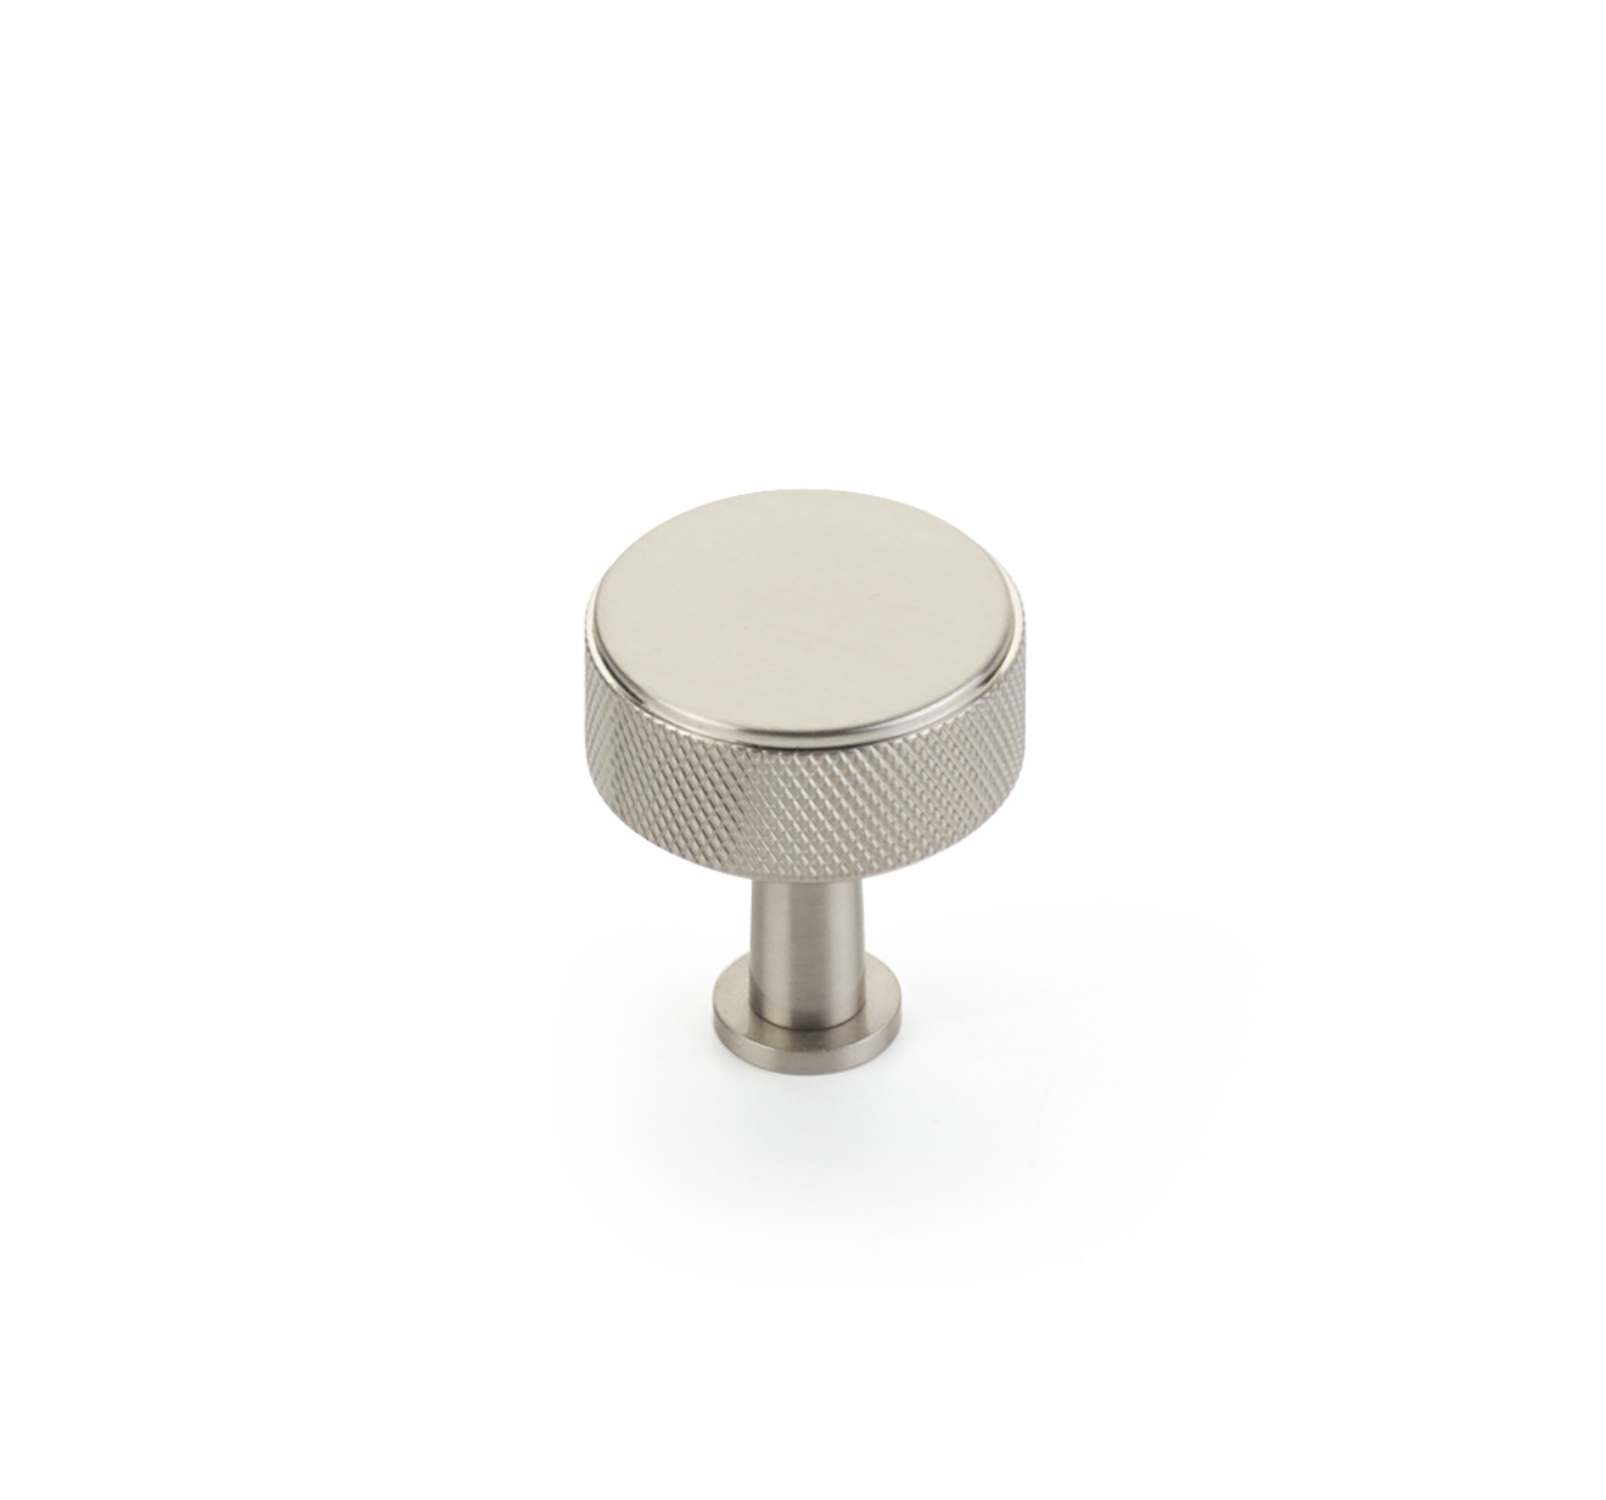 Brushed Nickel "Maison" Knurled Drawer Pulls and Cabinet Knobs with Optional Backplate - Industry Hardware